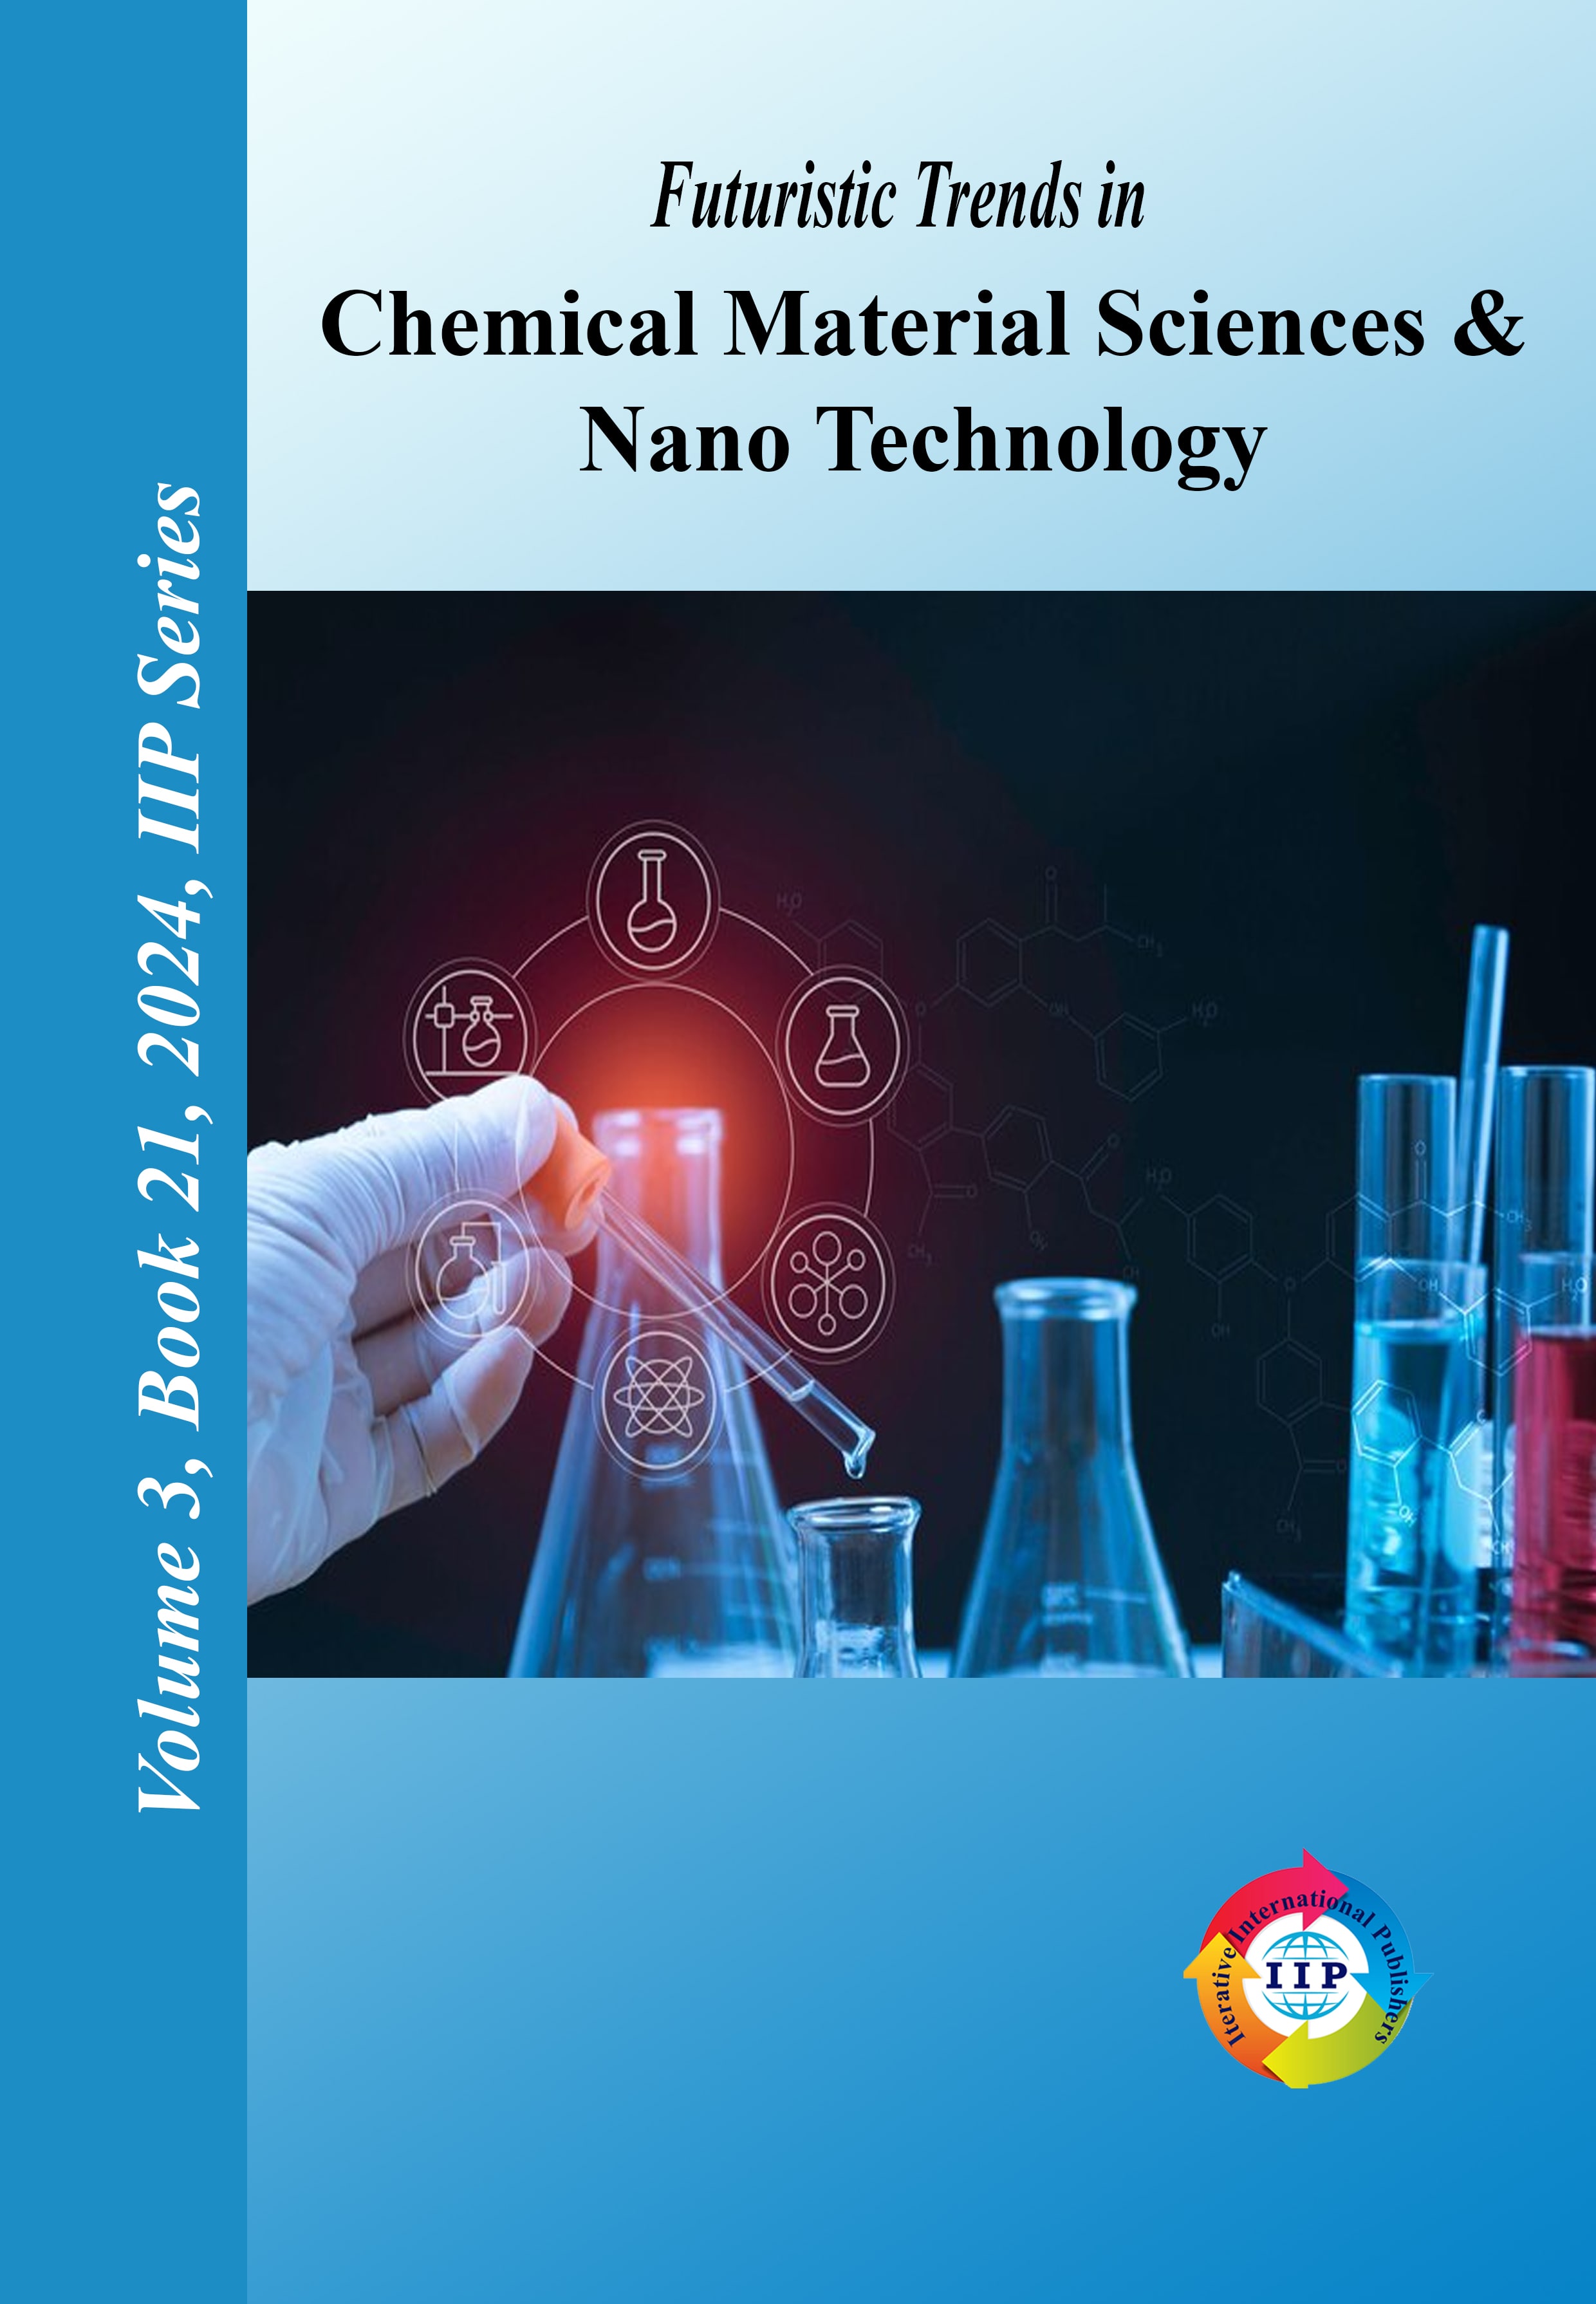 Futuristic Trends in Chemical Material Sciences & Nano Technology  Volume 3 Book 21